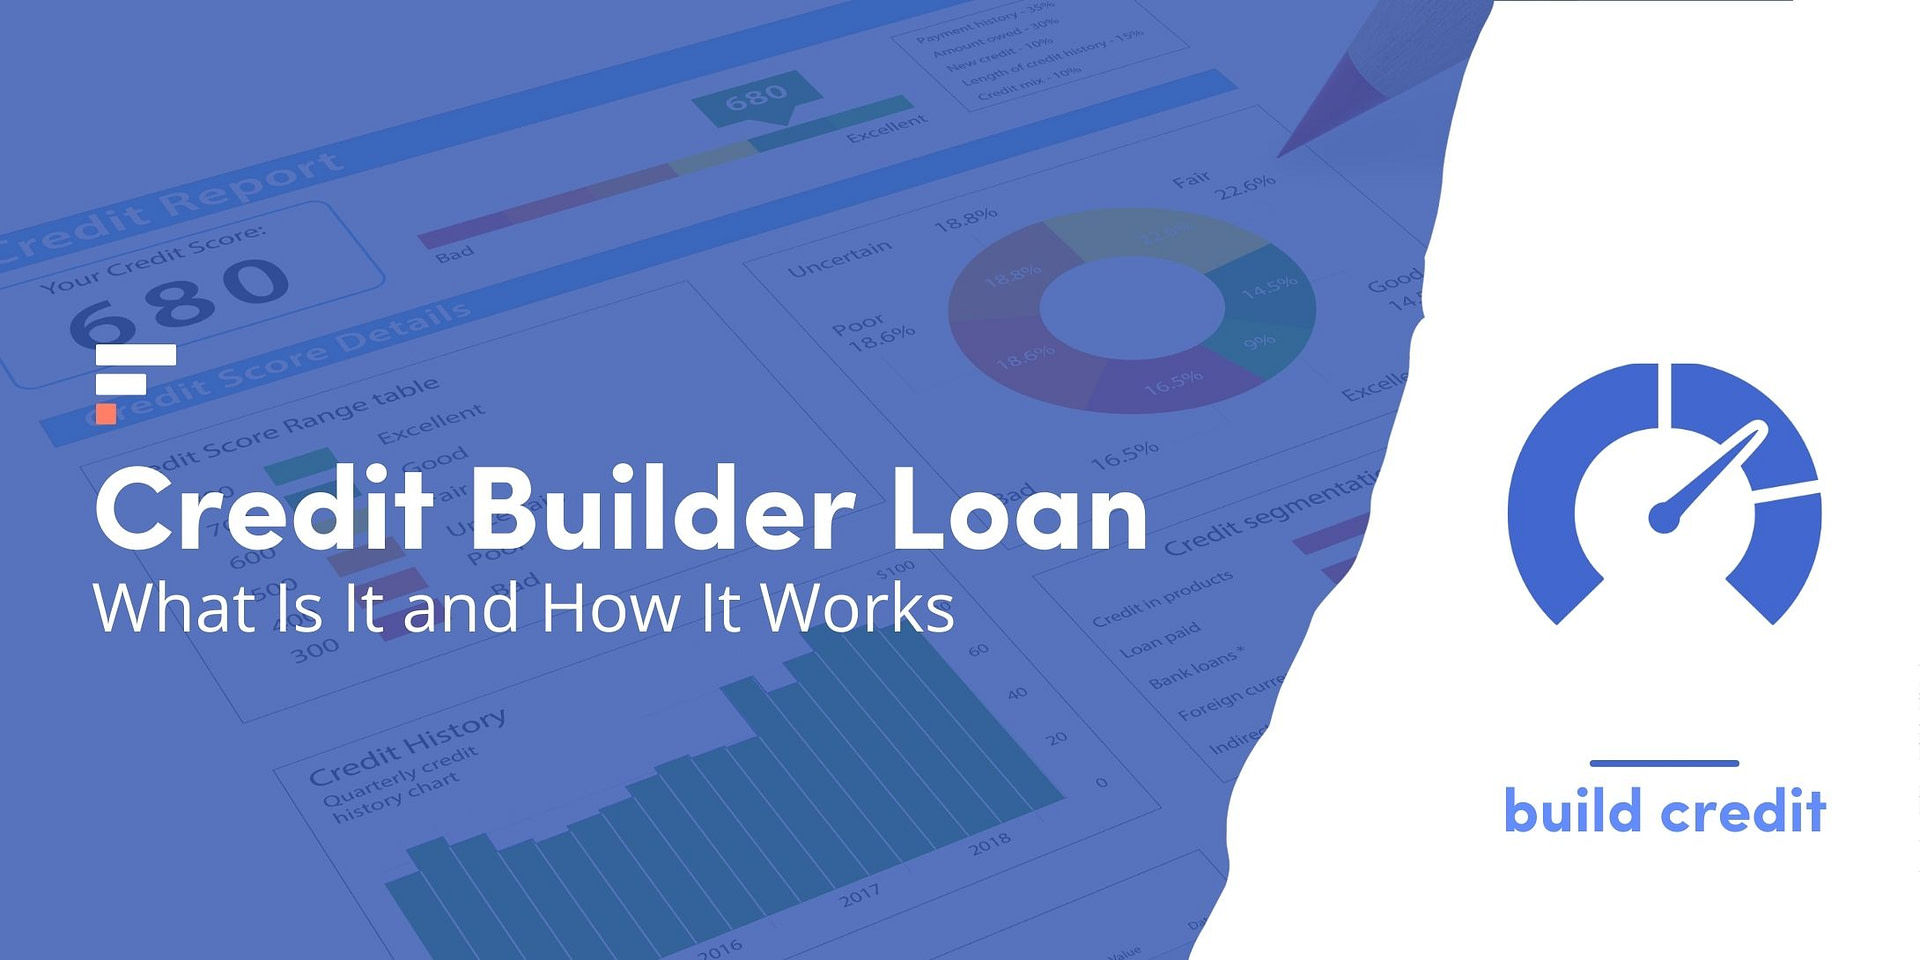 What Is a Credit Builder Loan and How Does It Work?